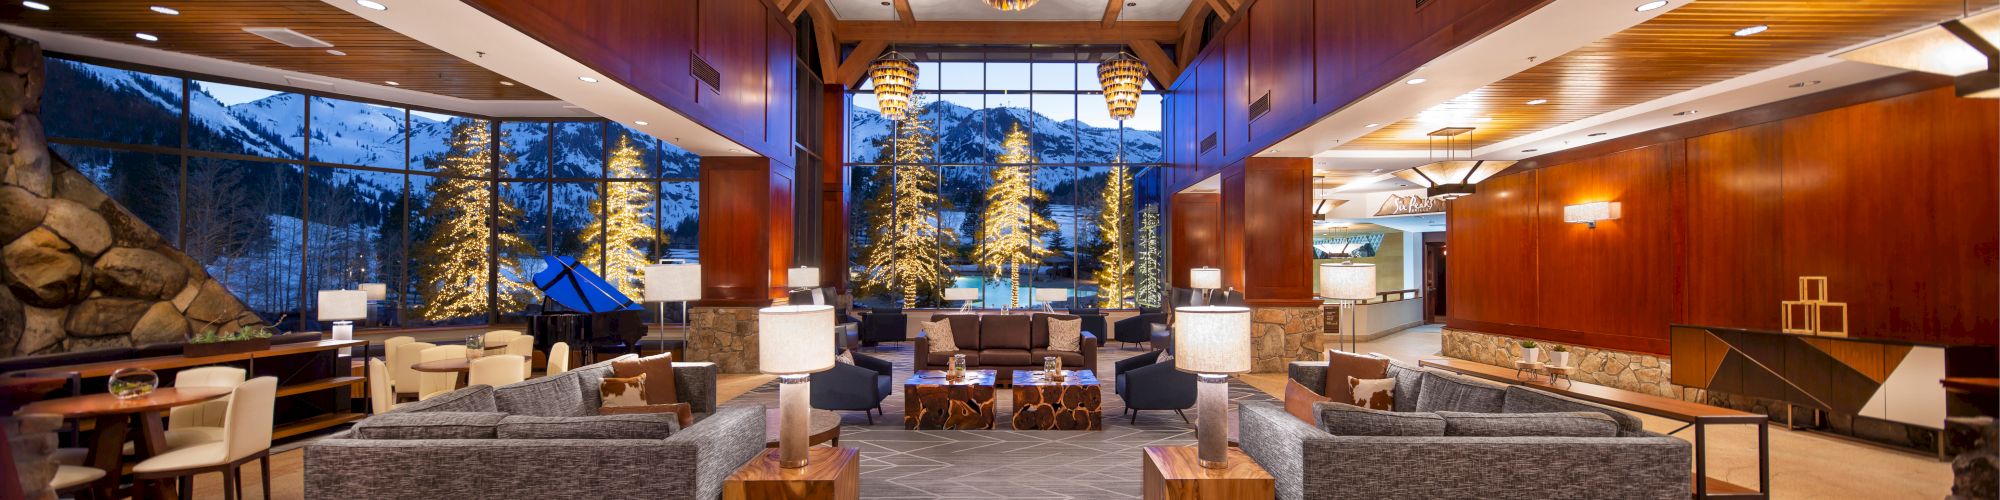 A modern and spacious lobby with large windows showcasing a snowy landscape. Features cozy seating, wooden accents, and elegant chandeliers.